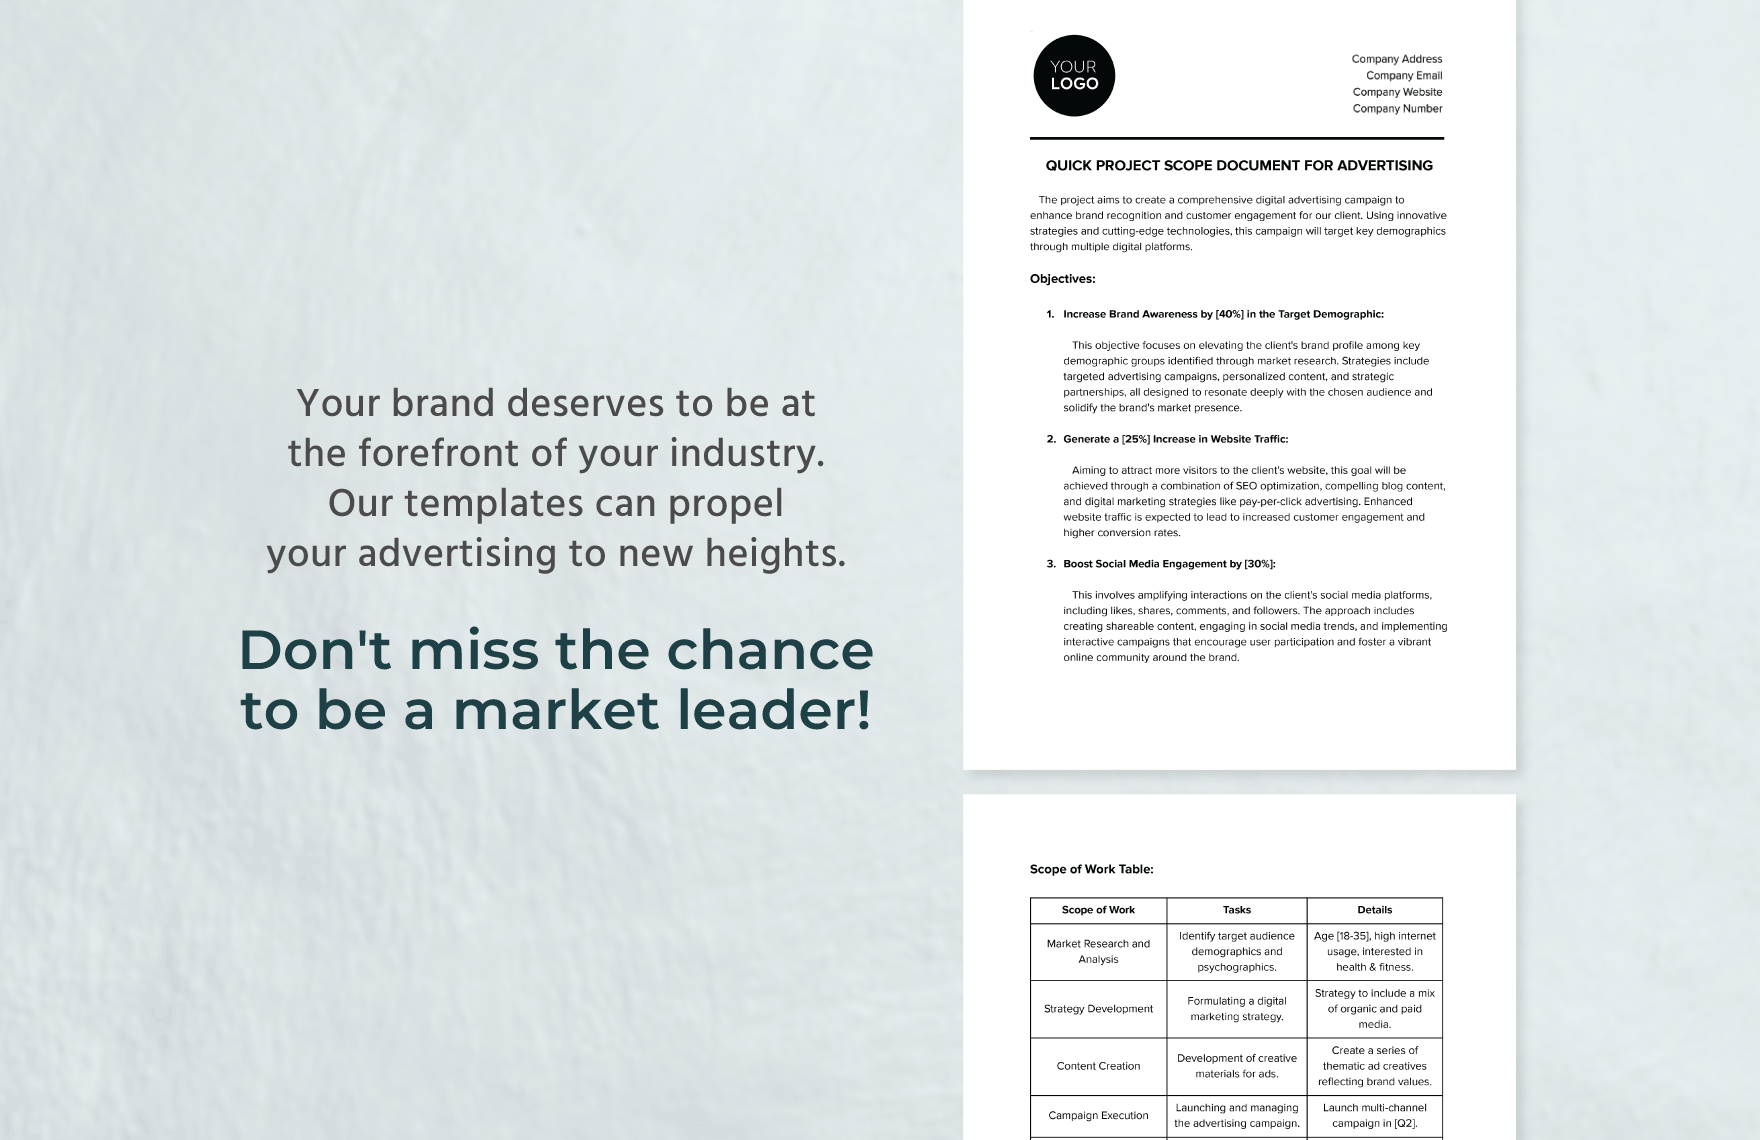 Quick Project Scope Document for Advertising Template